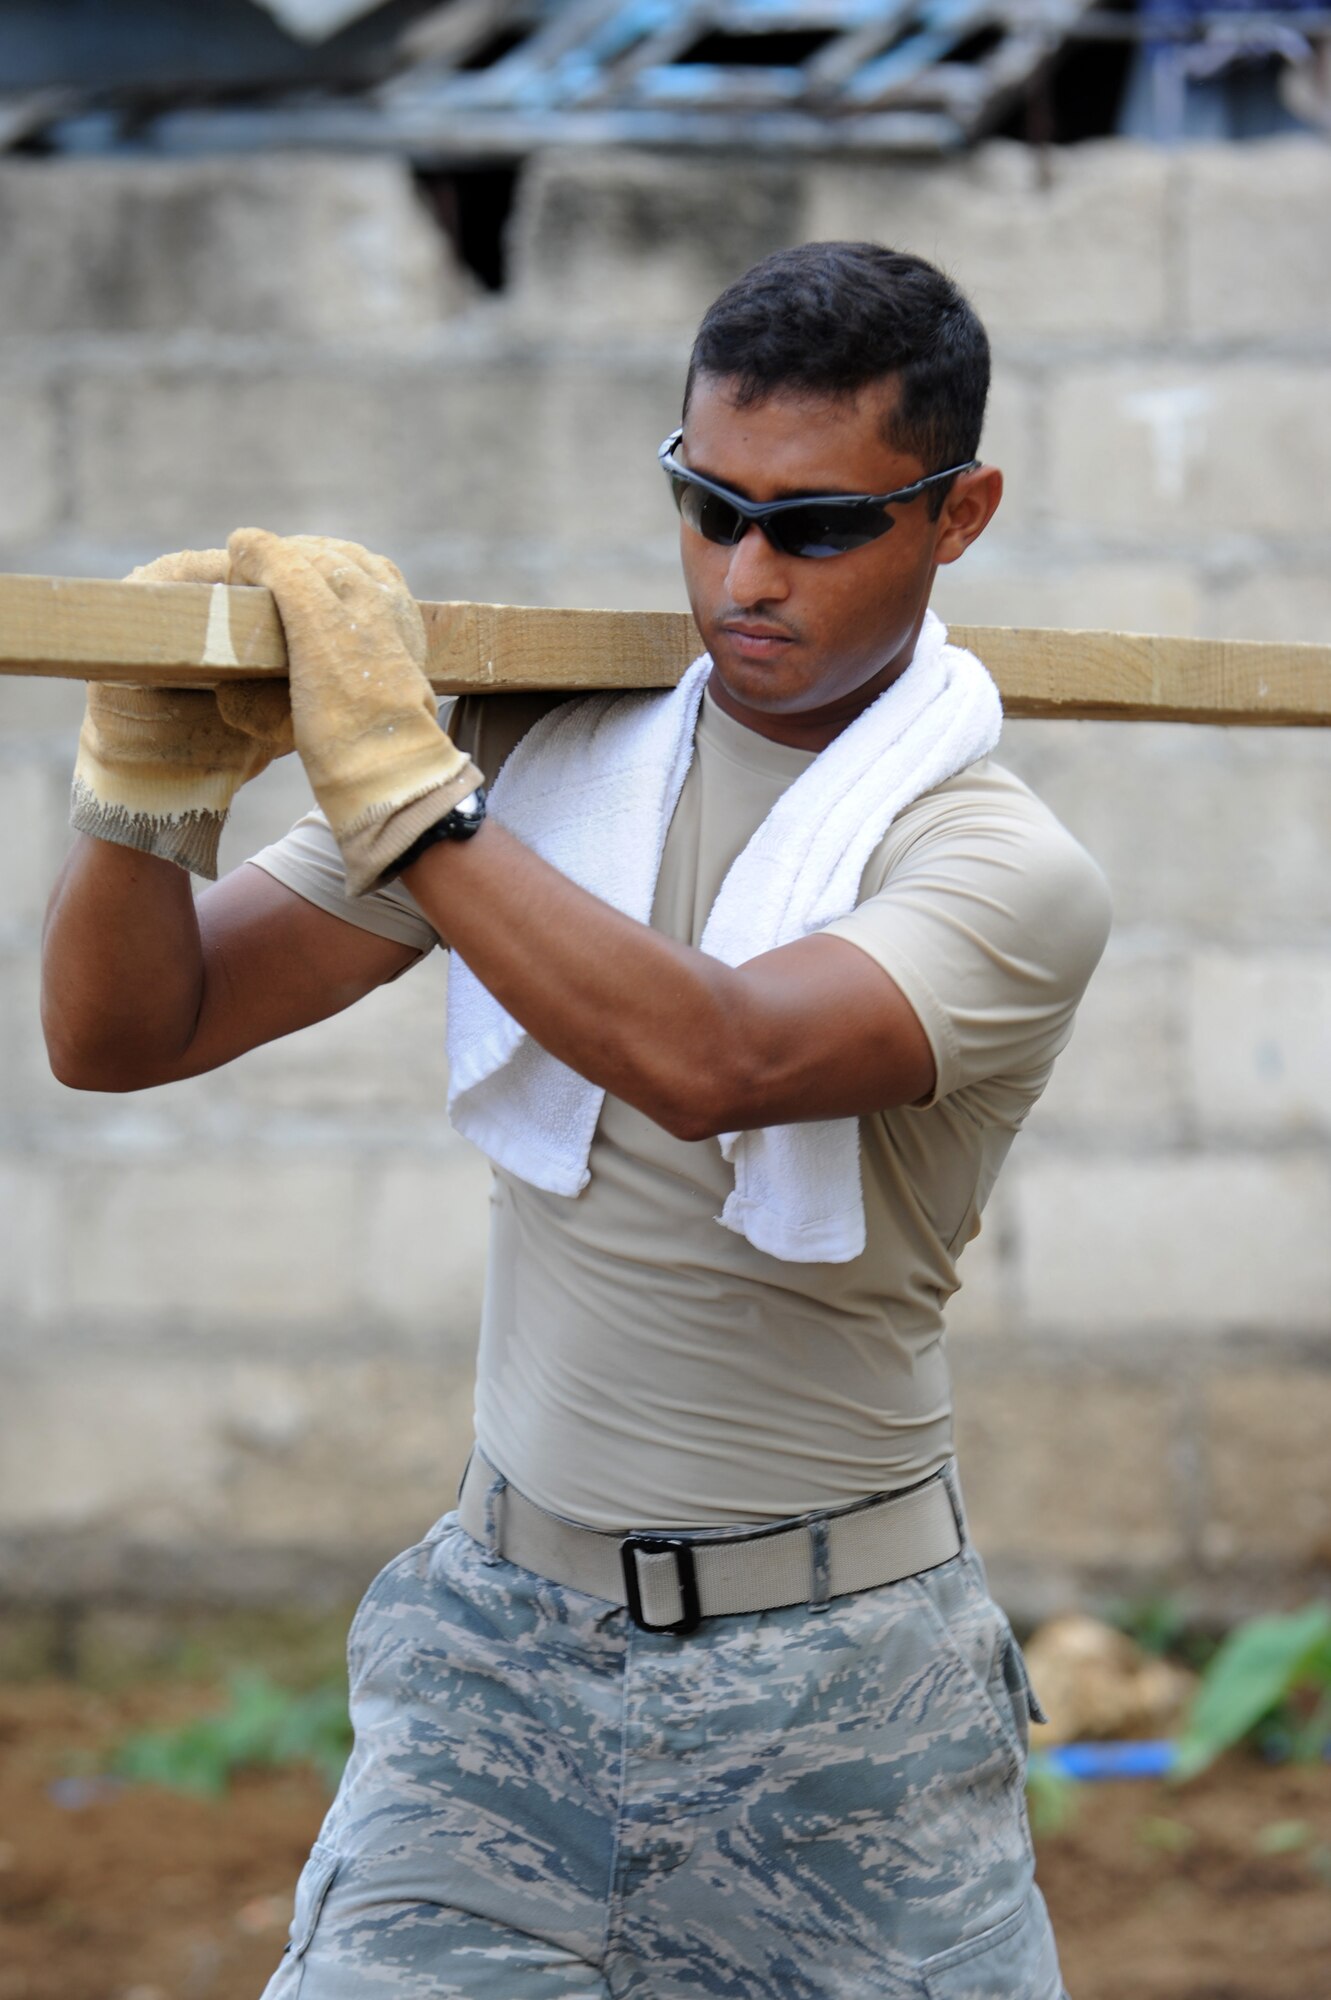 Senior Airman Ariful Haque carries a plank away from a construction site June 18, 2014, as cleanup begins at Buyong Elementary School in Barangay Maribago, Lapu-Lapu City, Philippines. Airmen from the 374th Civil Engineer Squadron, Yokota Air Base, Japan, spent 31 days building two classrooms and renovating utilities throughout the school as part of Operation Pacific Unity 14-6, a bilateral engineering program meant to strengthen ties with regional partners throughout the Asia-Pacific region. Haque is a utilities journeyman with the 374th CES. (U.S. Air Force photo/Staff Sgt. Amber E. N. Jacobs)